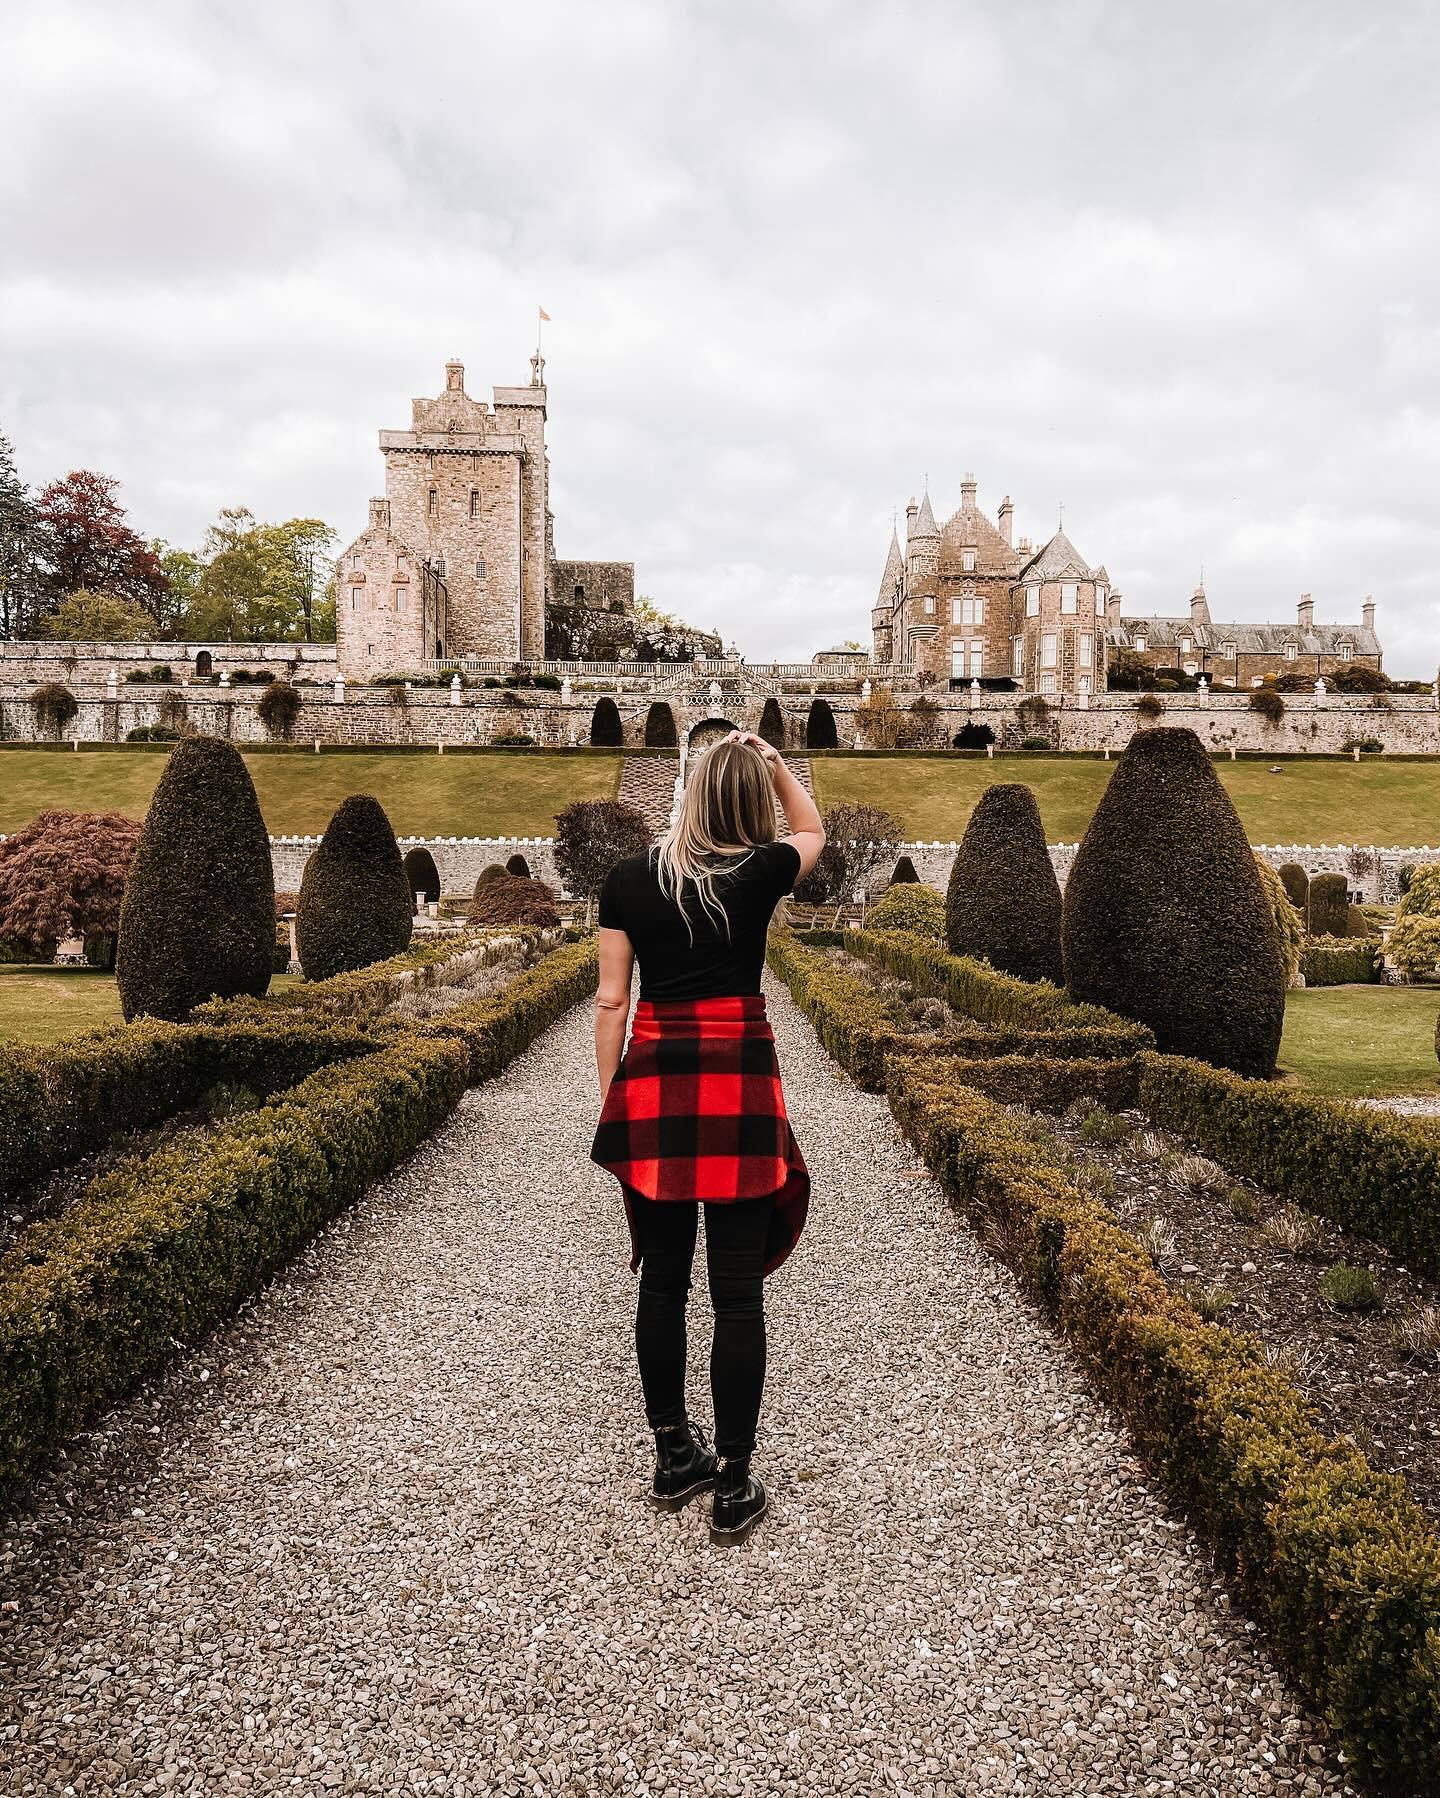 Went to visit the gorgeous Drummond castle gardens last spring and forgot to share about it.

Even with it not being in full bloom it still was so magical to see.

When I'm in places like this I always think of the people who used to roam around thes